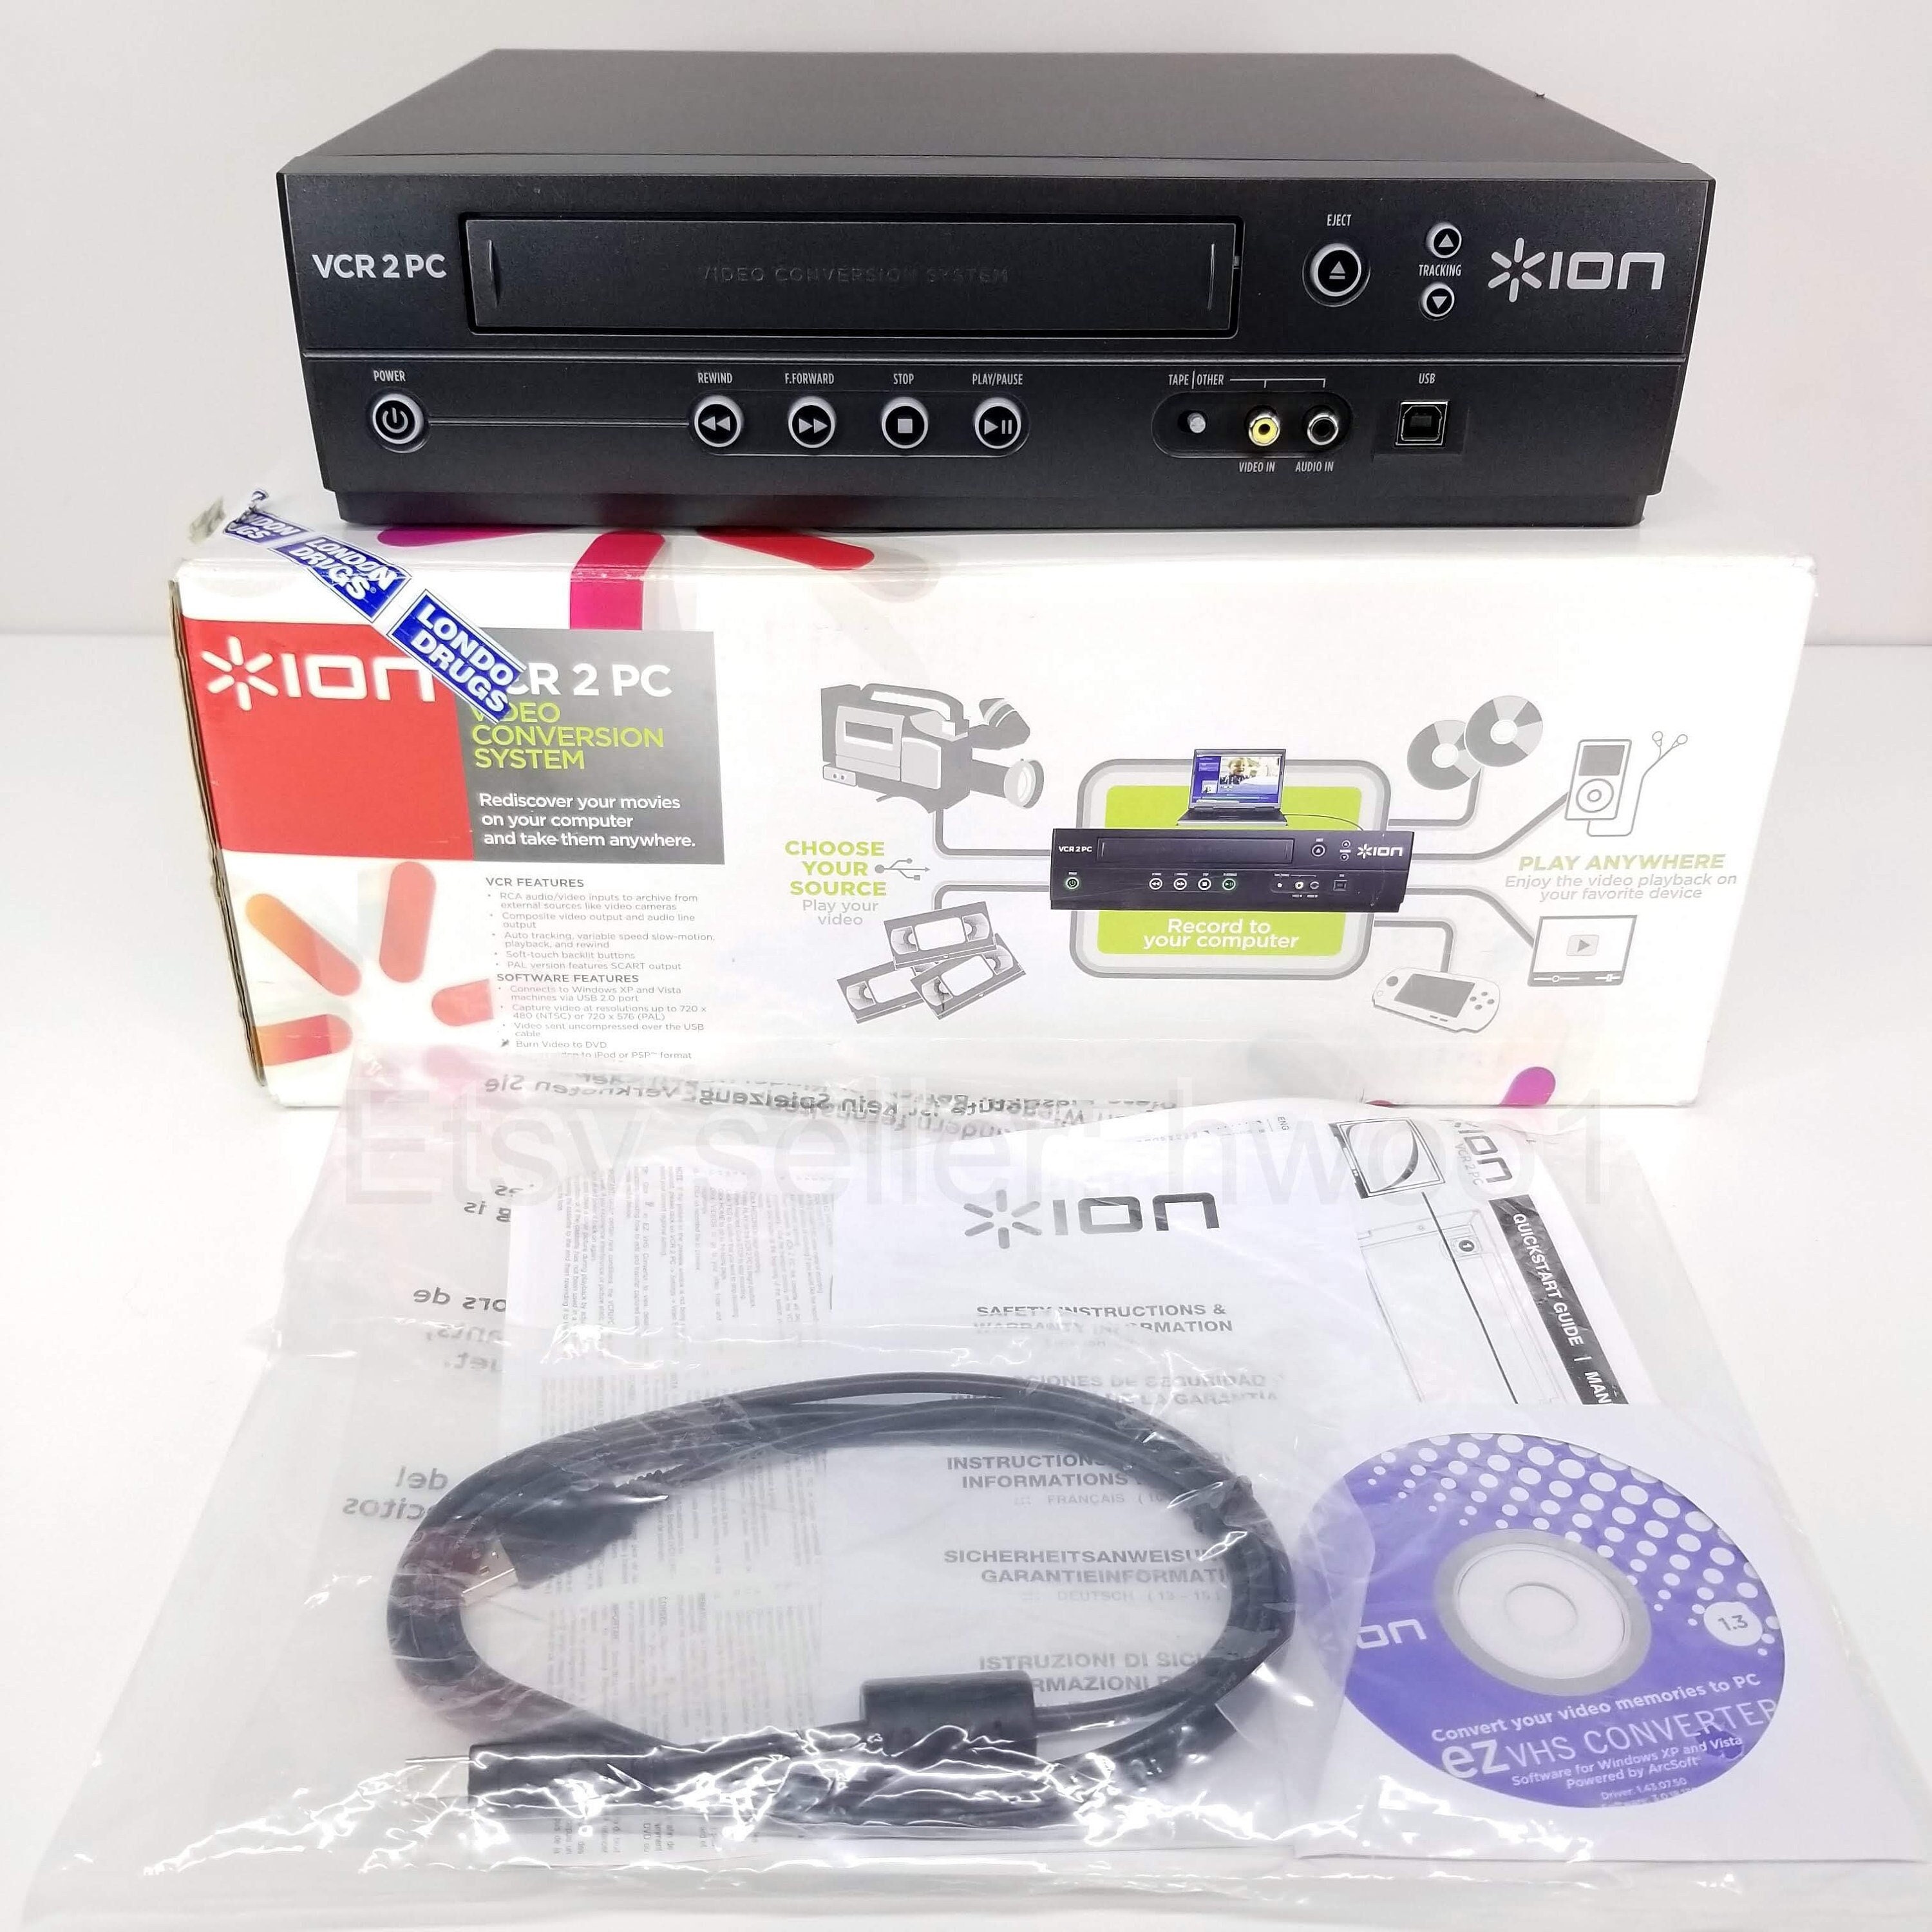 Ion Audio VCR 2 PC USB Vhs Video to Computer Converter, in Box 